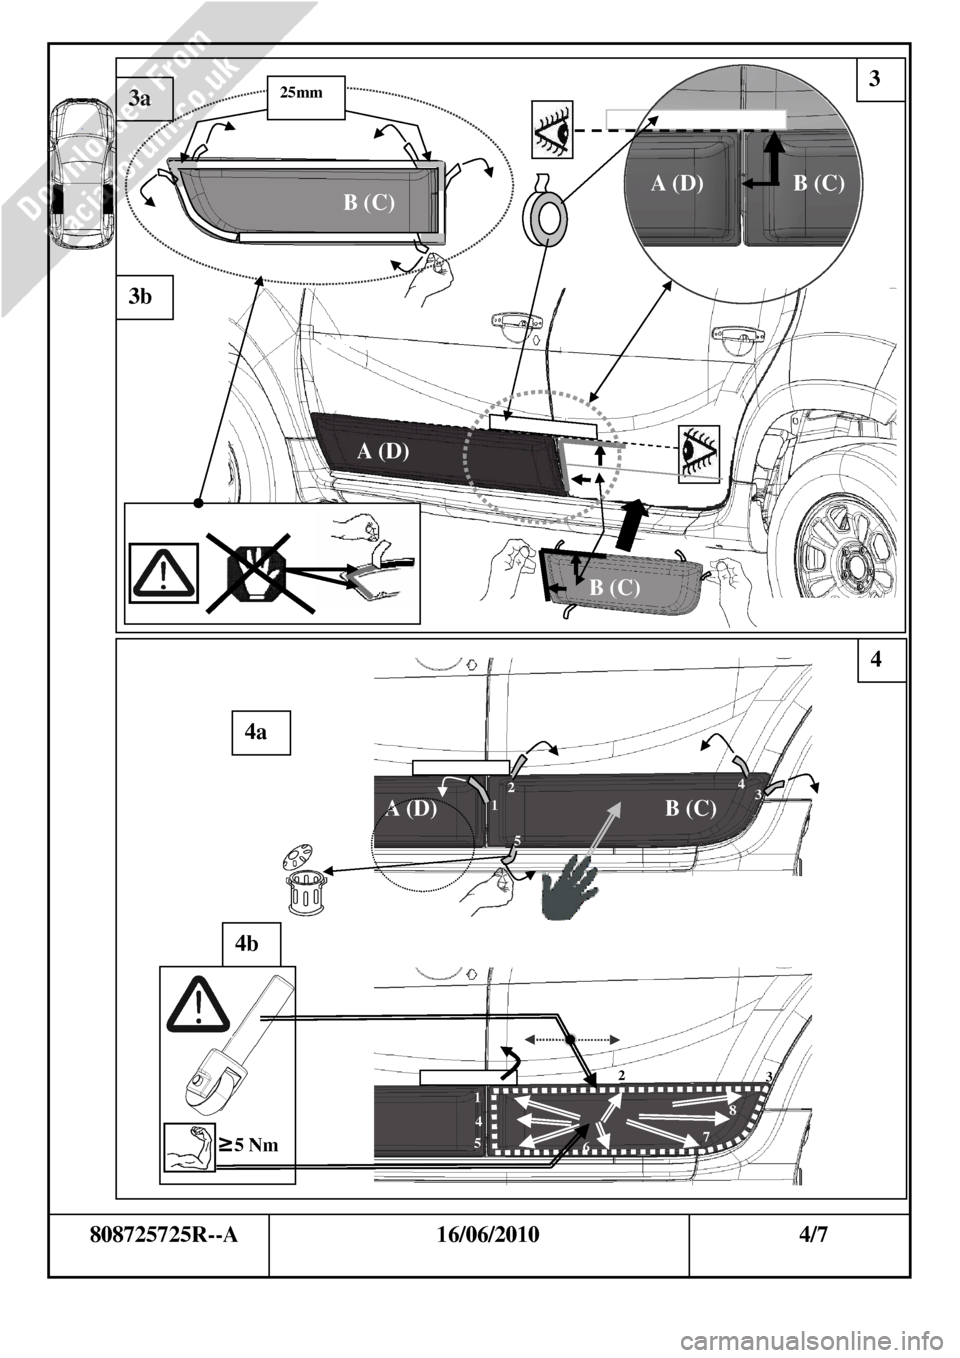 DACIA DUSTER 2010 1.G Door Mouldings Fitting Guide Workshop Manual                              
                        
      808725725R--A                                   16/06/2010                                              4/7 
        
4 
3 
4a 
A (D) 
B (C